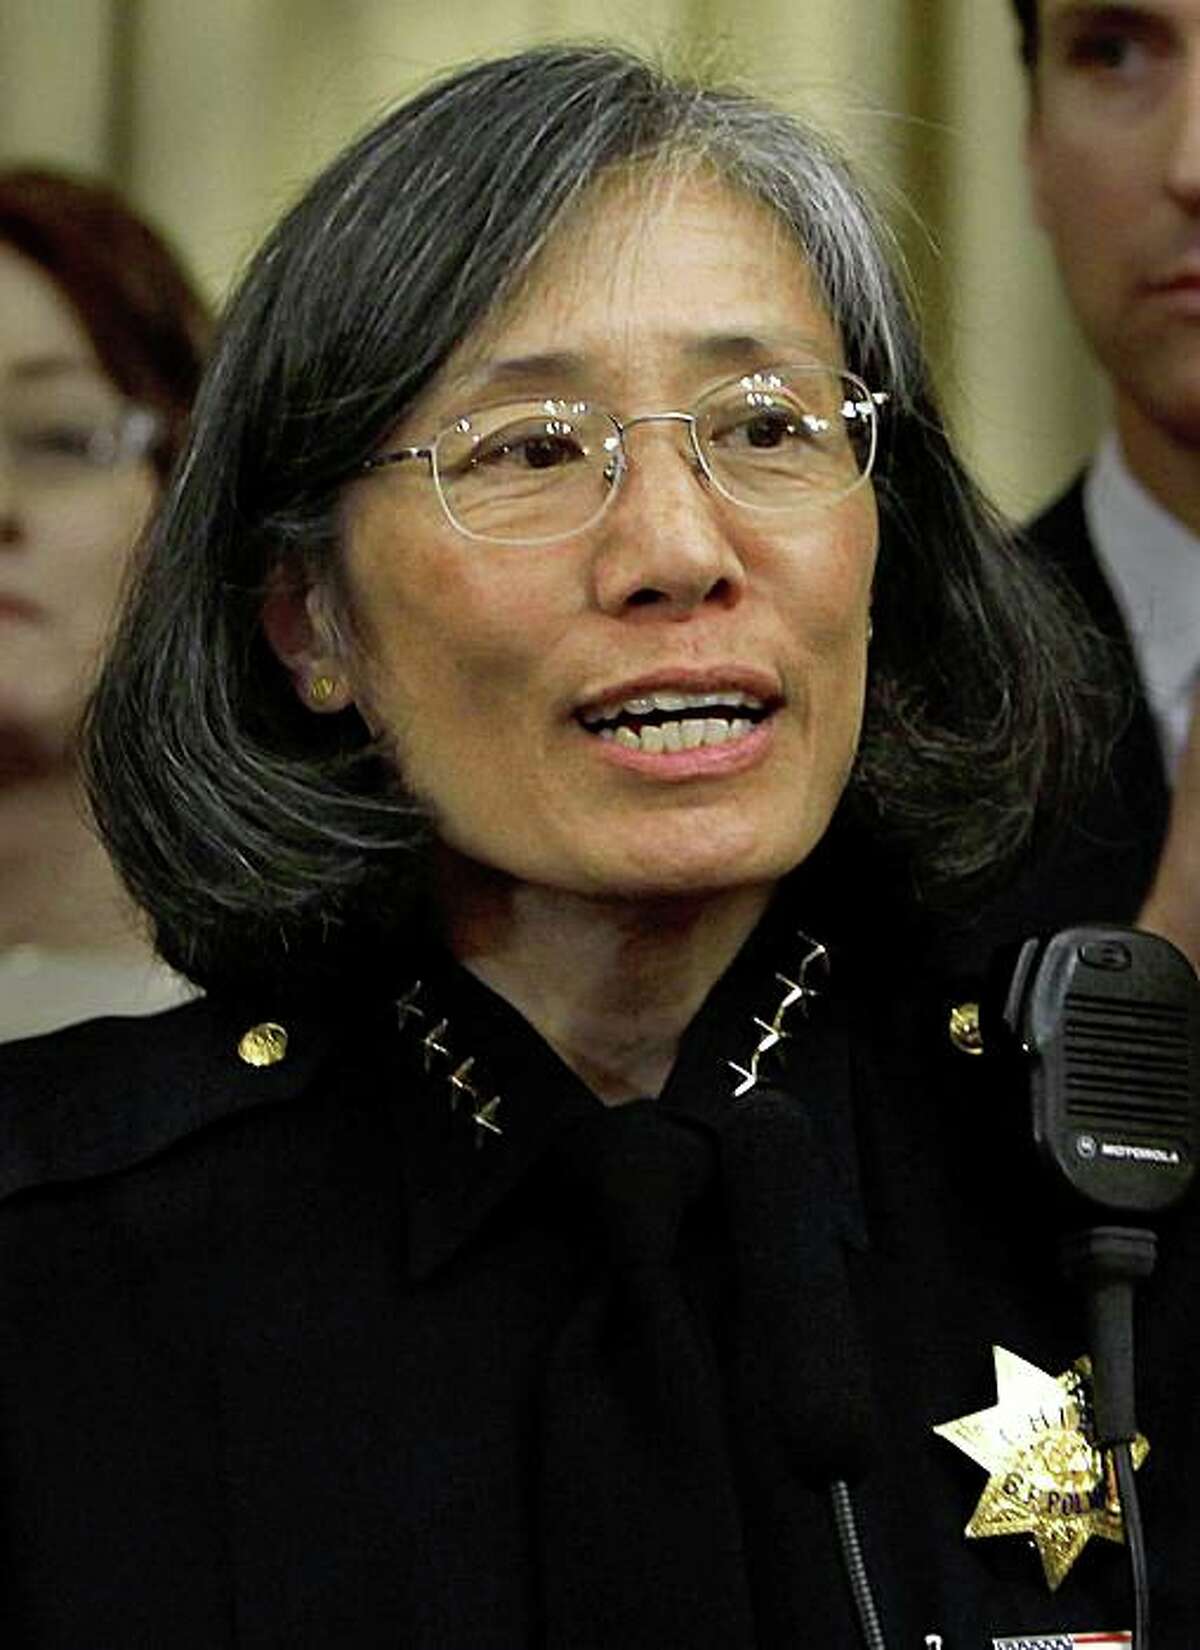 Current San Francisco Police chief Heather Fong speaks to the media during the introduction George Gascon, on Wednesday June 17, 2009 as the new Police Chief of San Francisco, Calif.